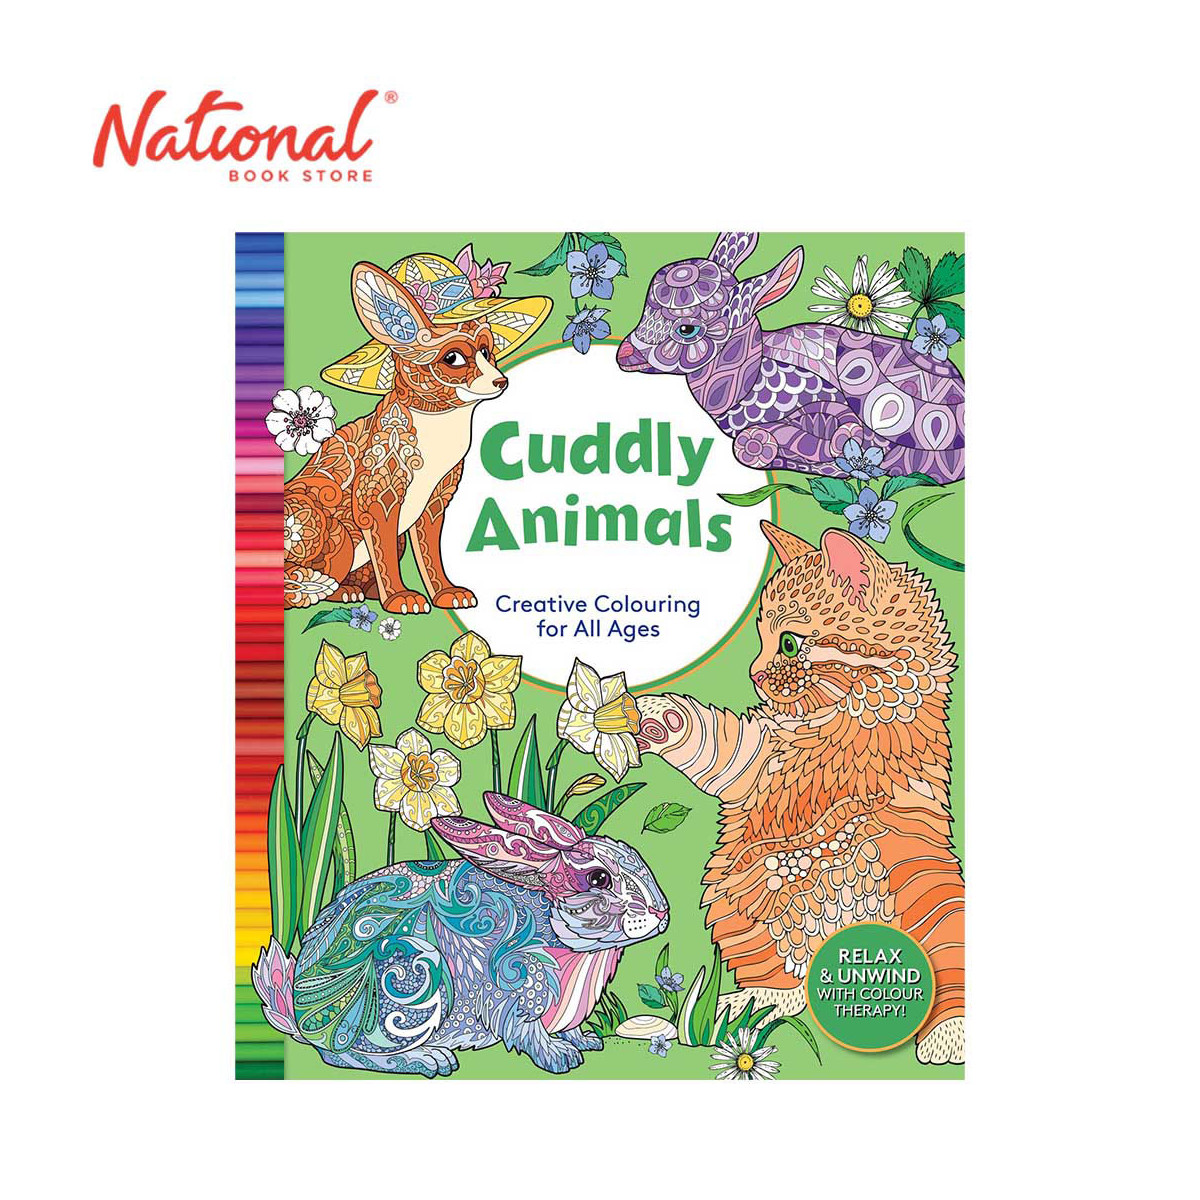 Cuddly Animals: Creative Coloring for All Ages - Trade Paperback - Coloring Book